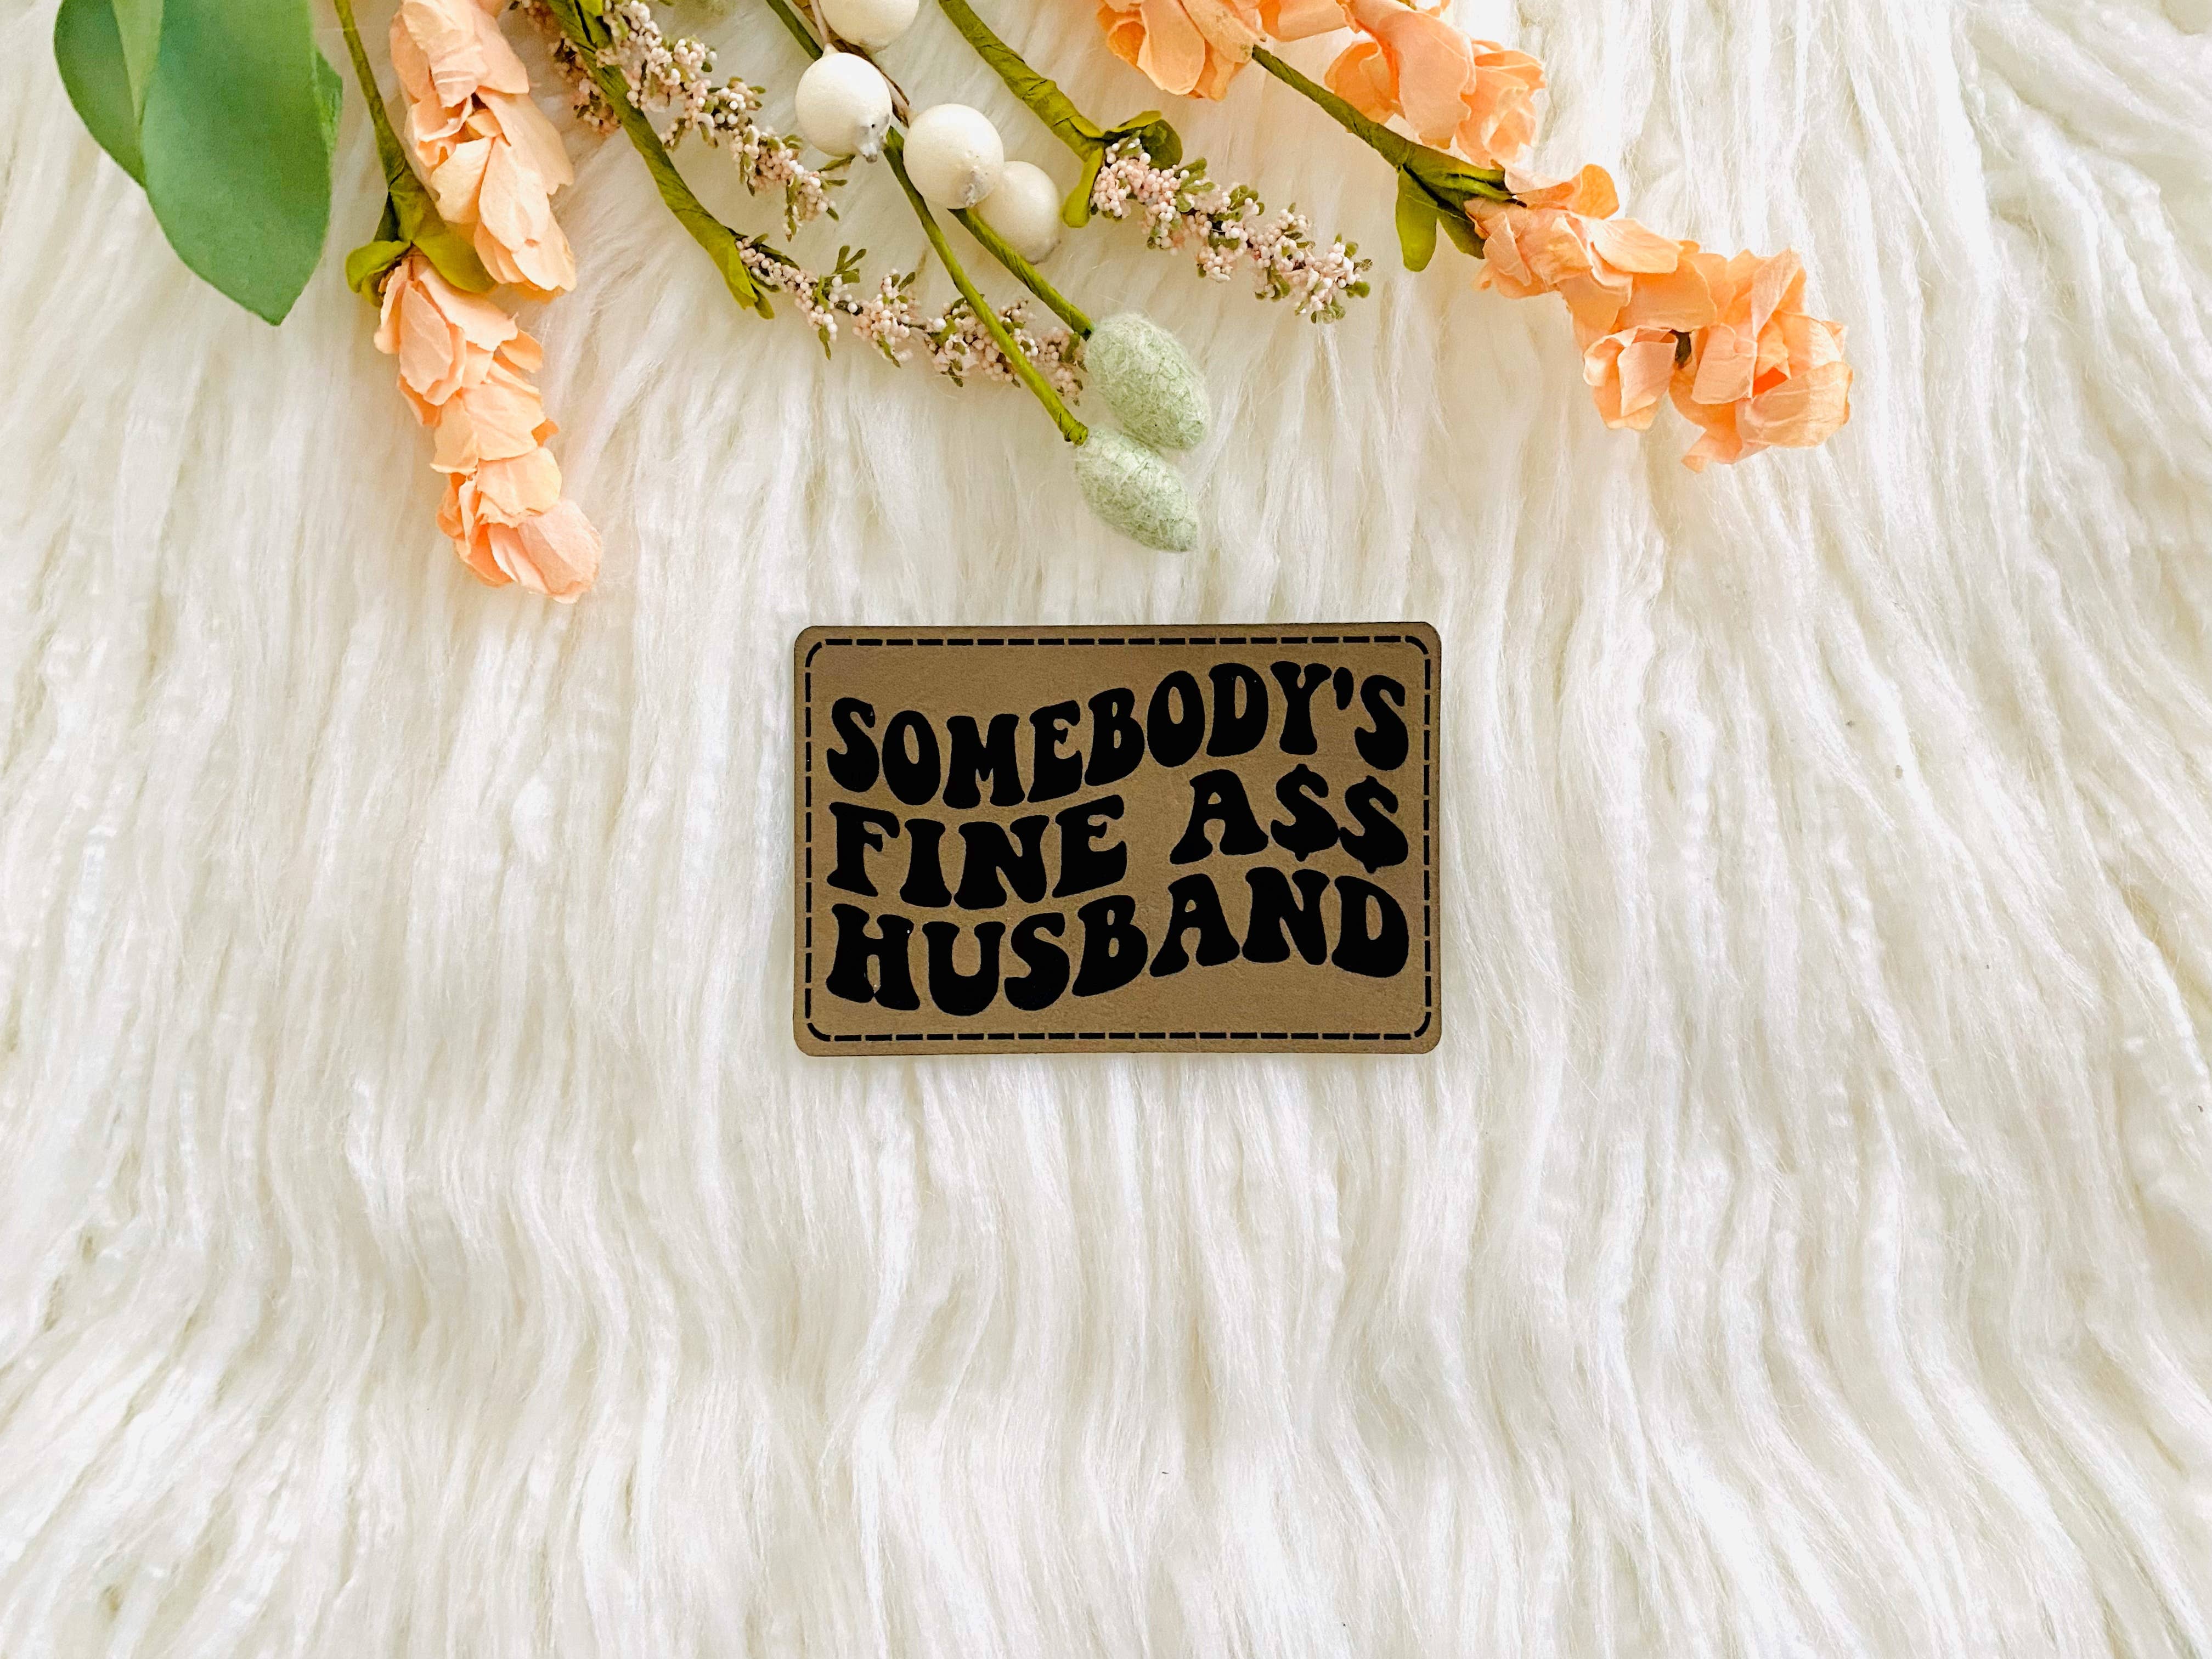 Somebody's fine ass Husband leather patch